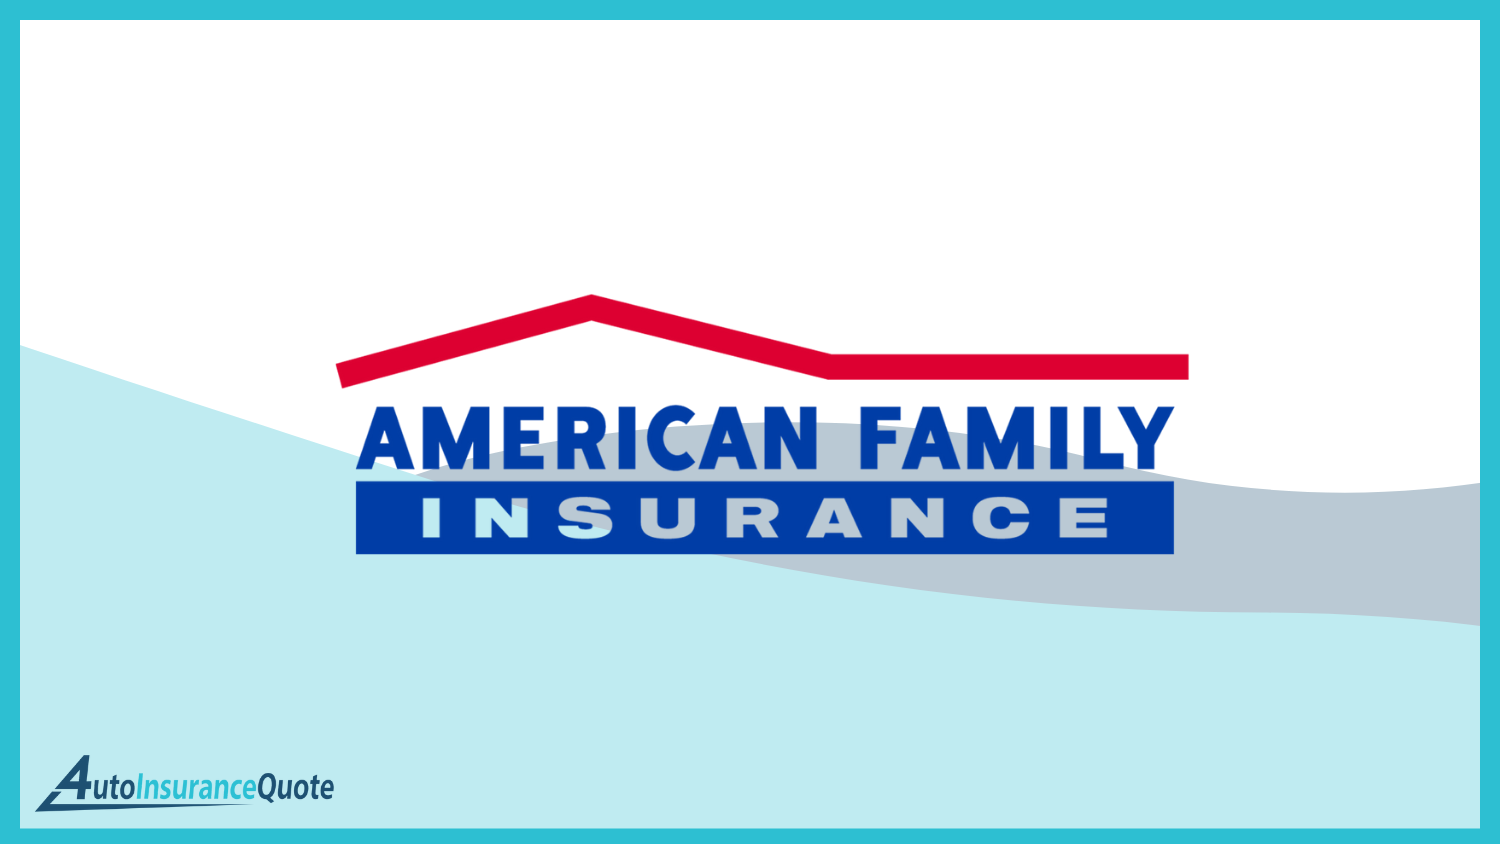 American Family: Best Temporary Auto Insurance